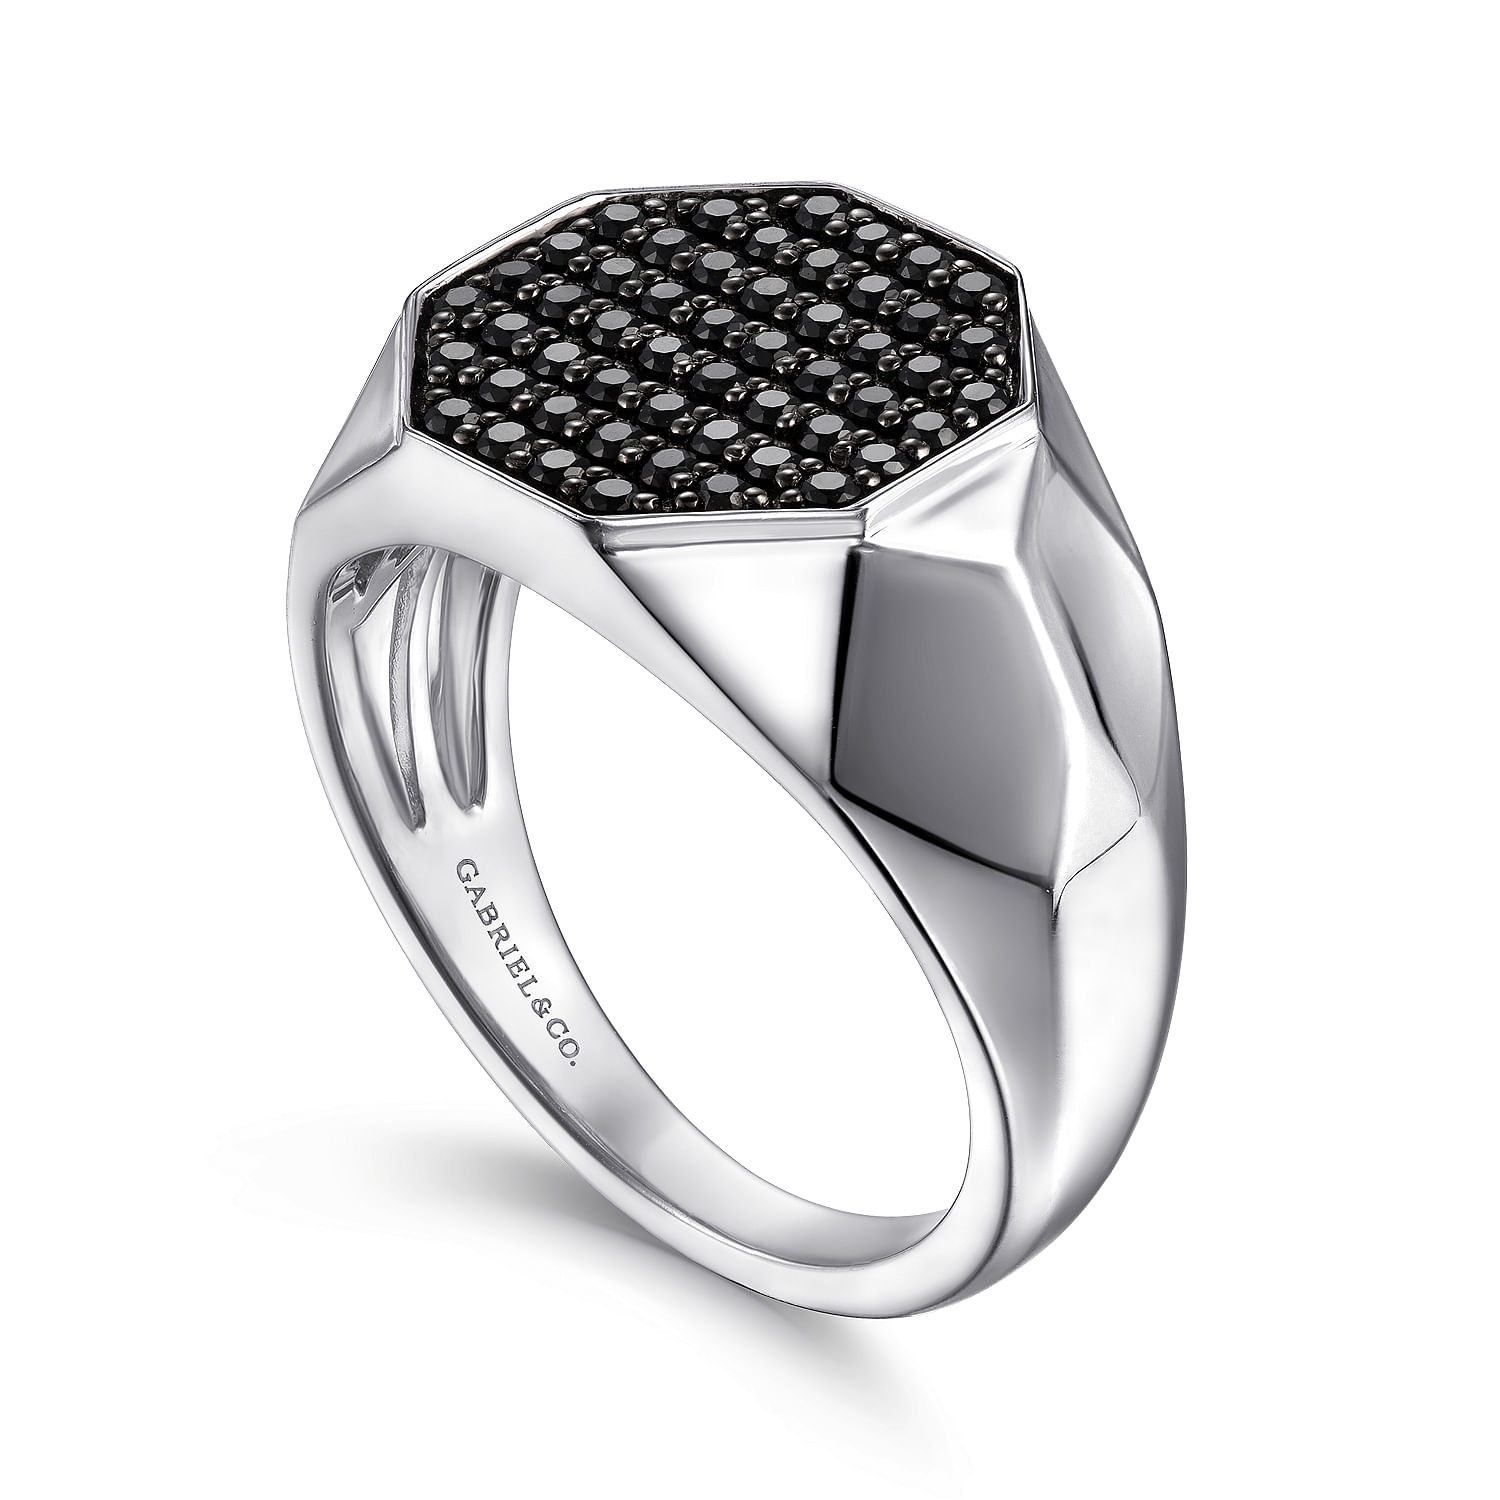 Wide 925 Sterling Silver Faceted Signet Ring with Black Spinel Pavé in High Polished Finish